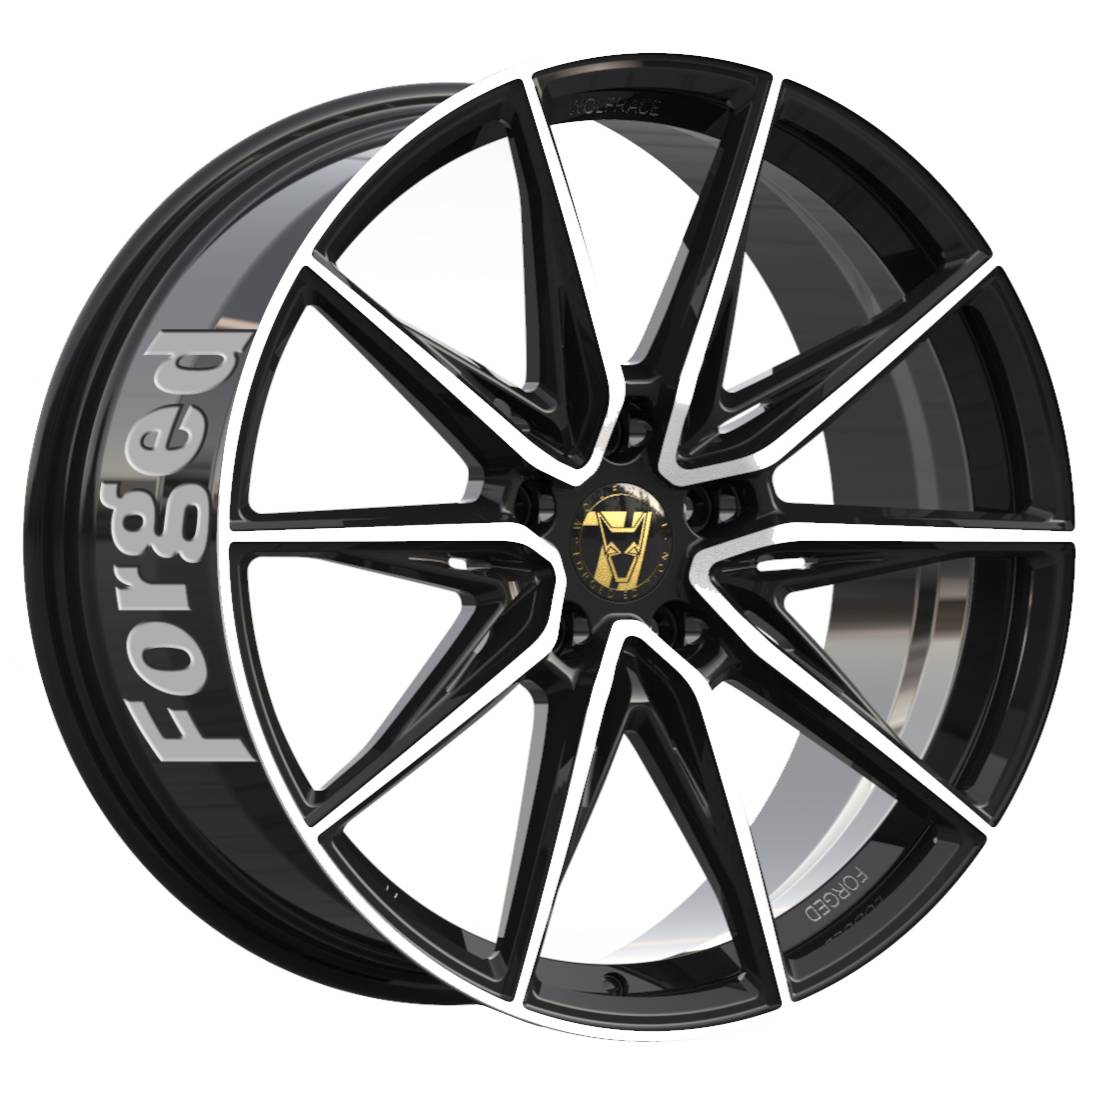 Demon Wheels 71 Forged Edition Urban Racer Forged Gloss Raven Black Polished